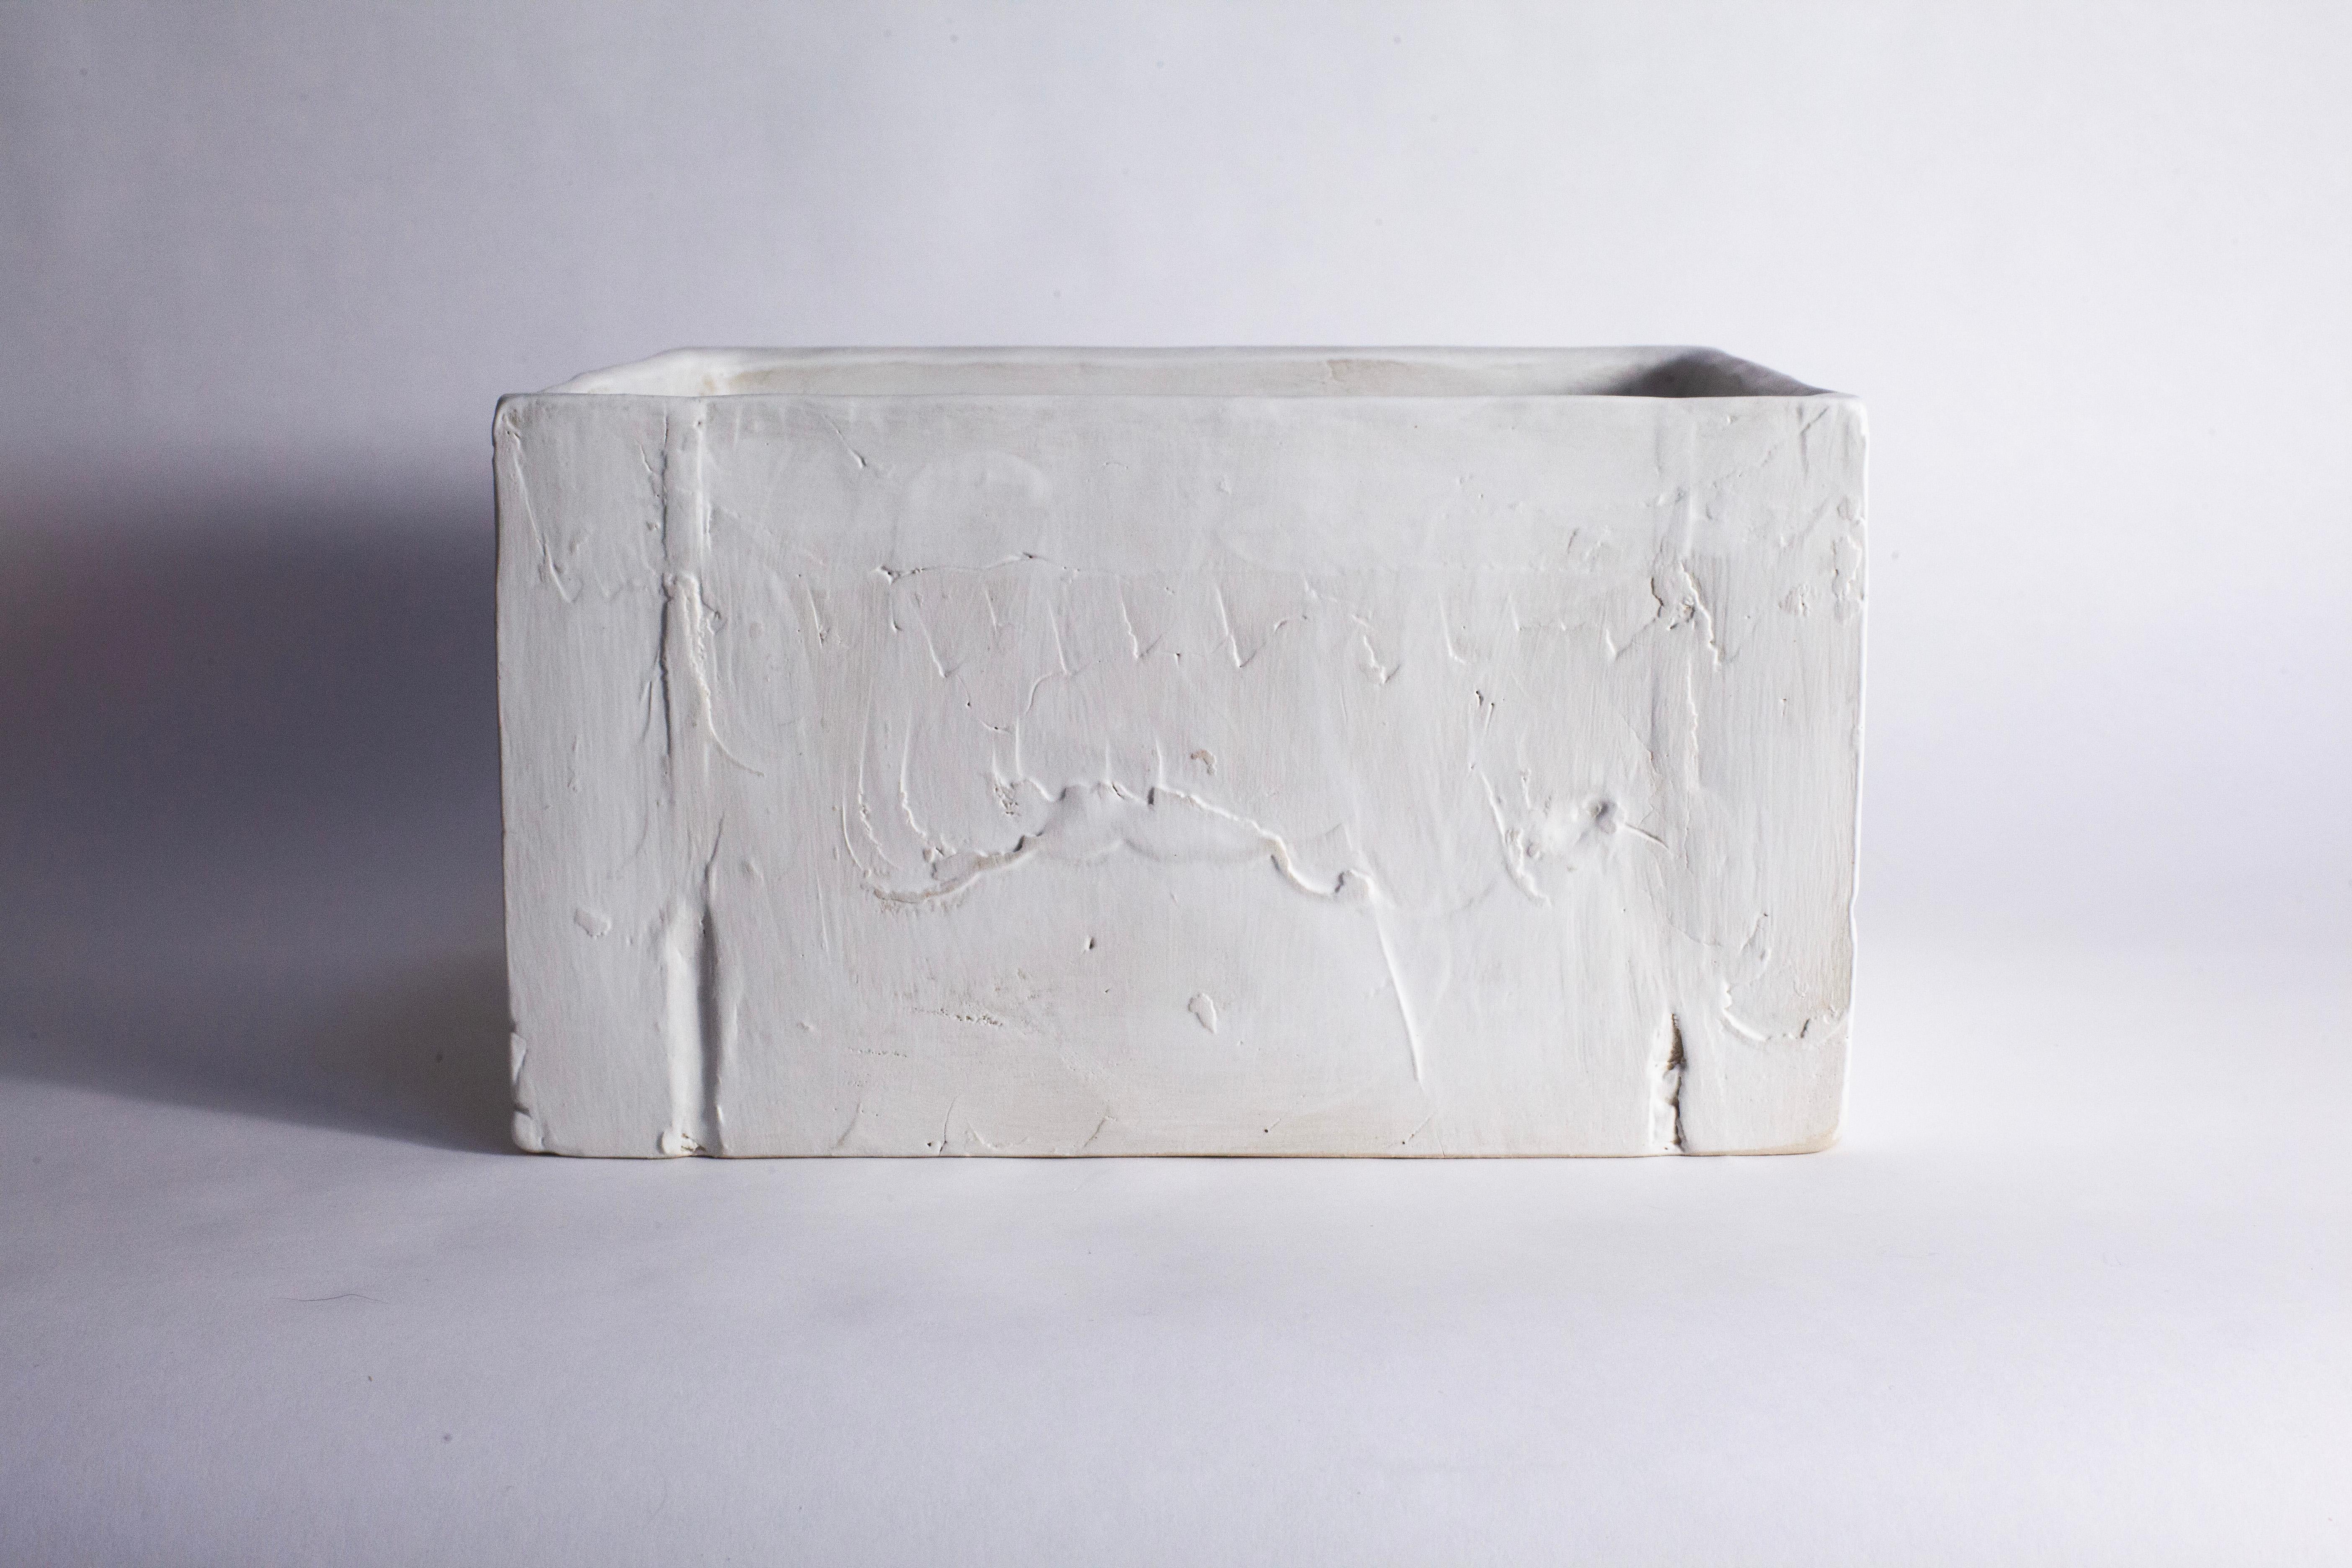 A hand-built, decorative box with a wood-carving -like texture.
Made from smooth, white stoneware and finished with a white, matte, glaze.
The process of building and scraping the material as this box was formed leaves a modelled and physical